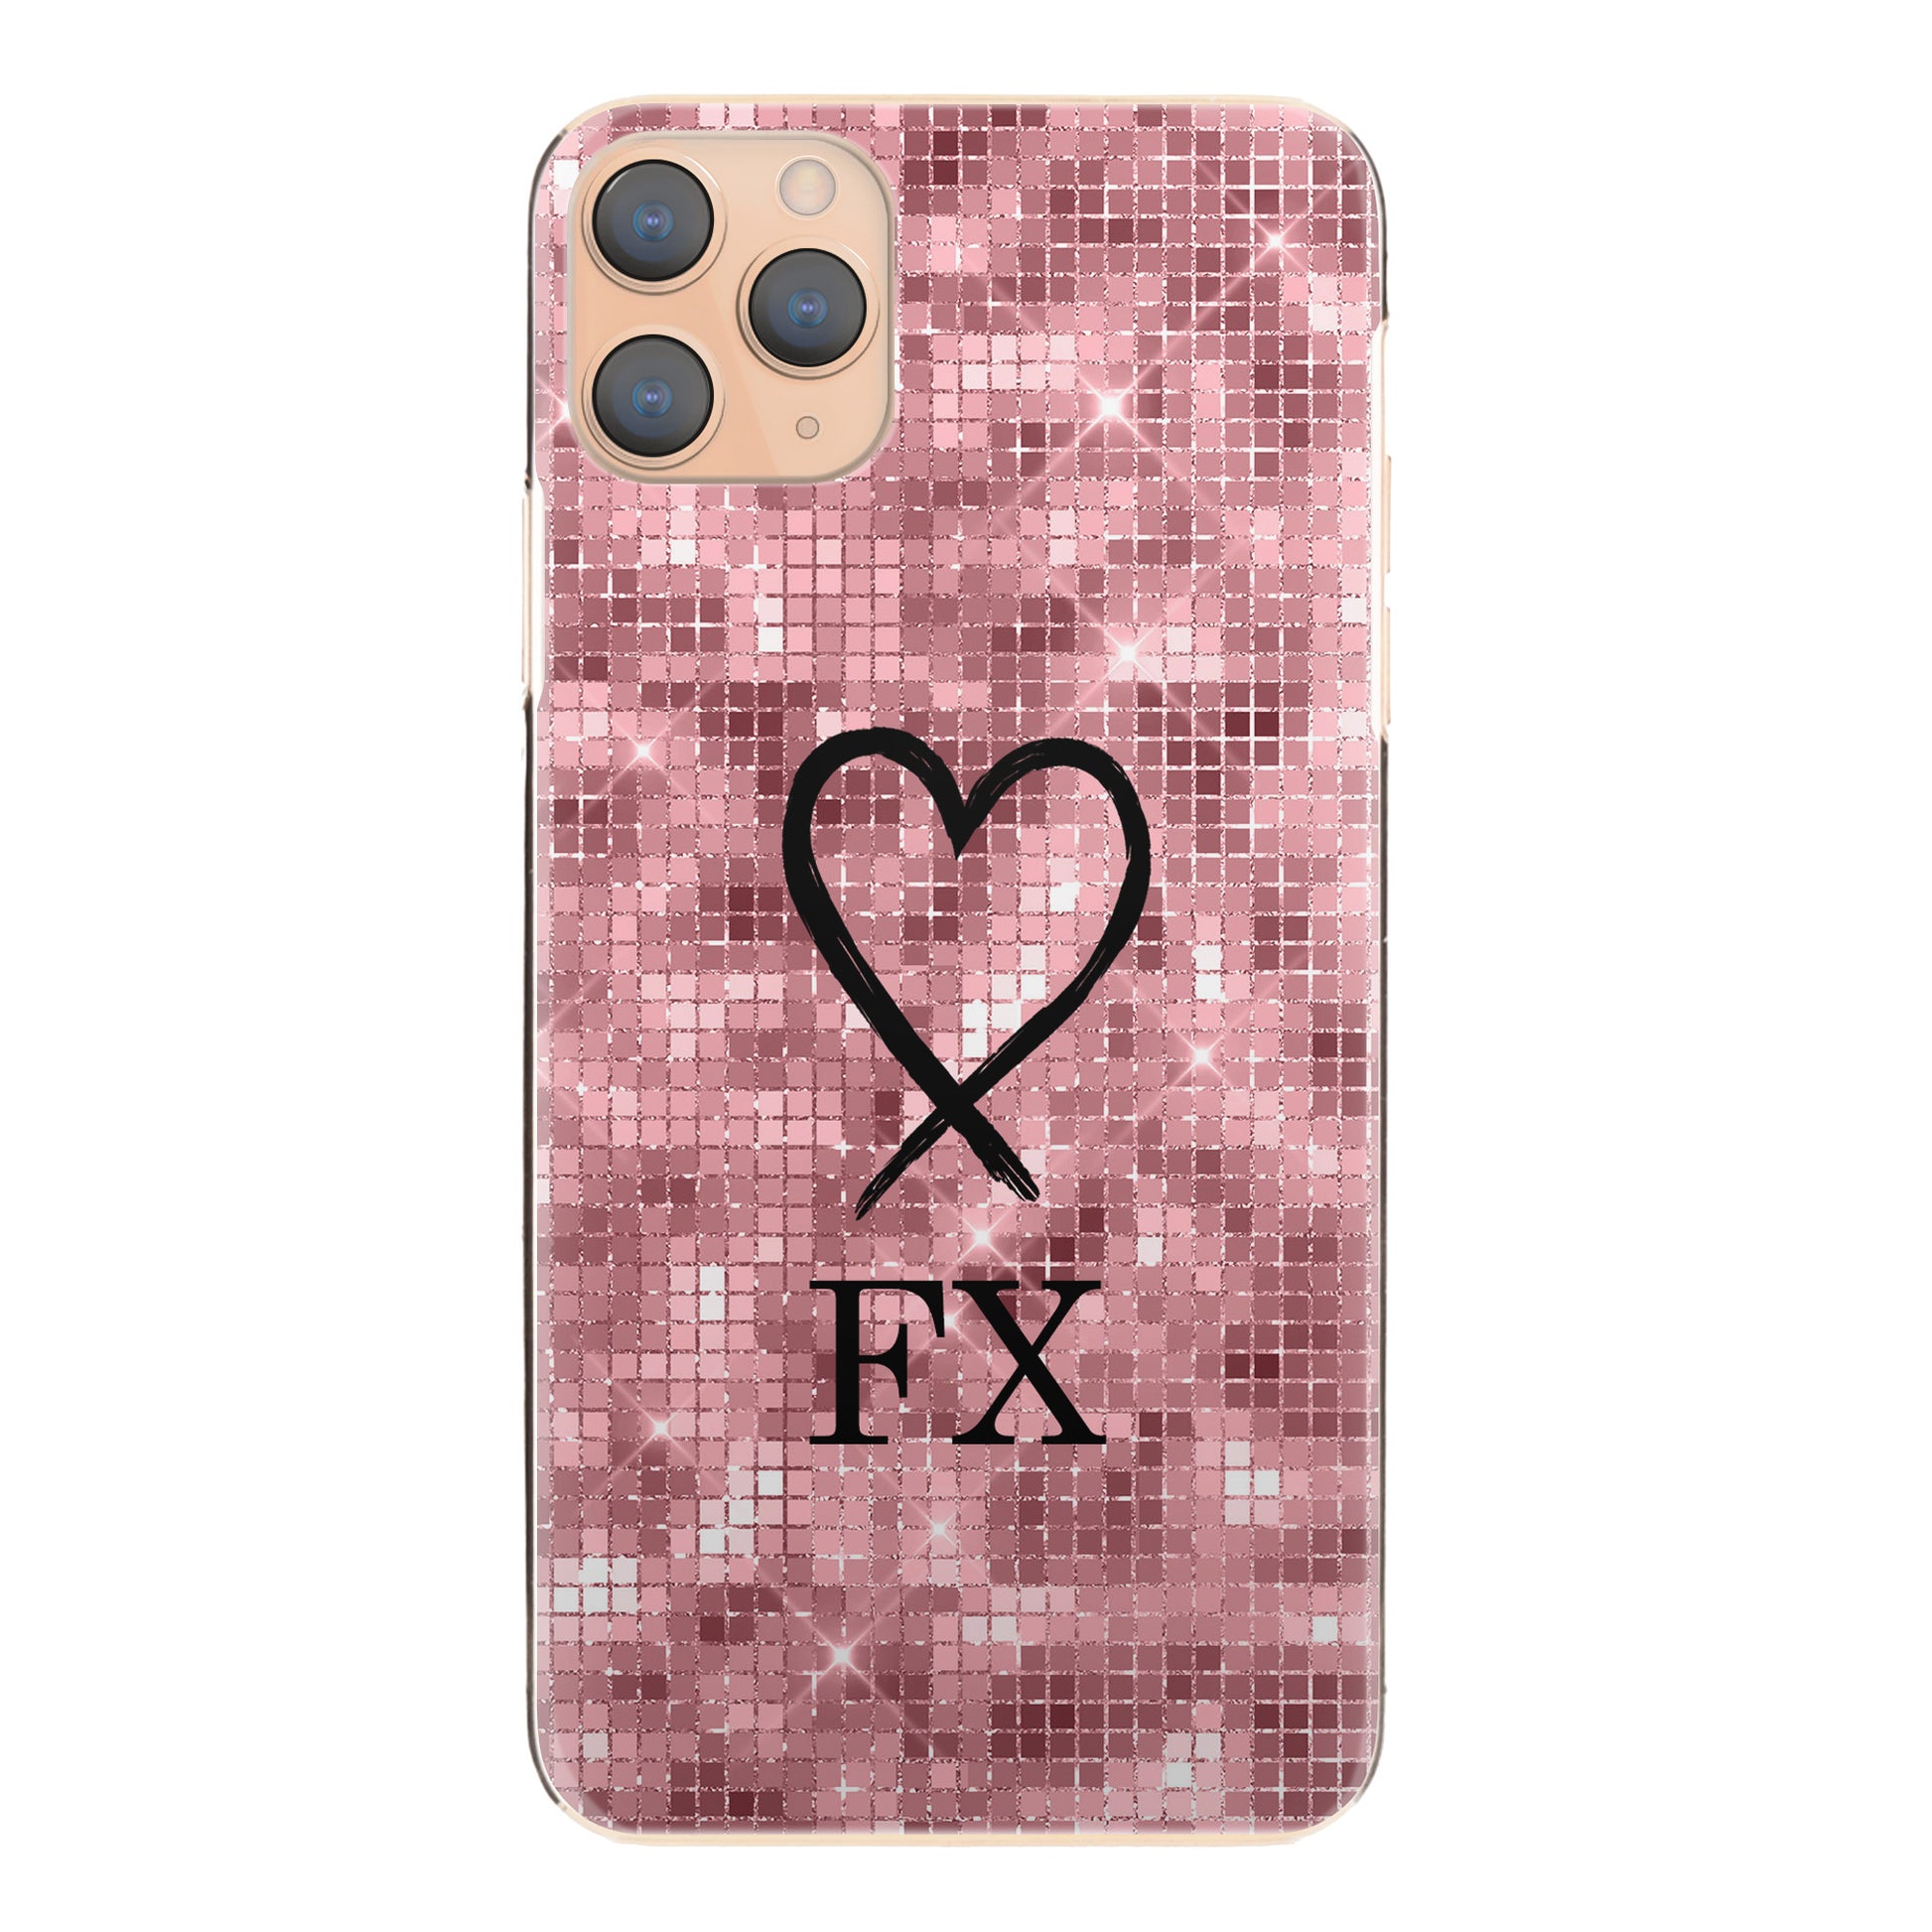 Personalised Huawei Phone Hard Case with Heart Sketch and Initials on Pink Disco Ball